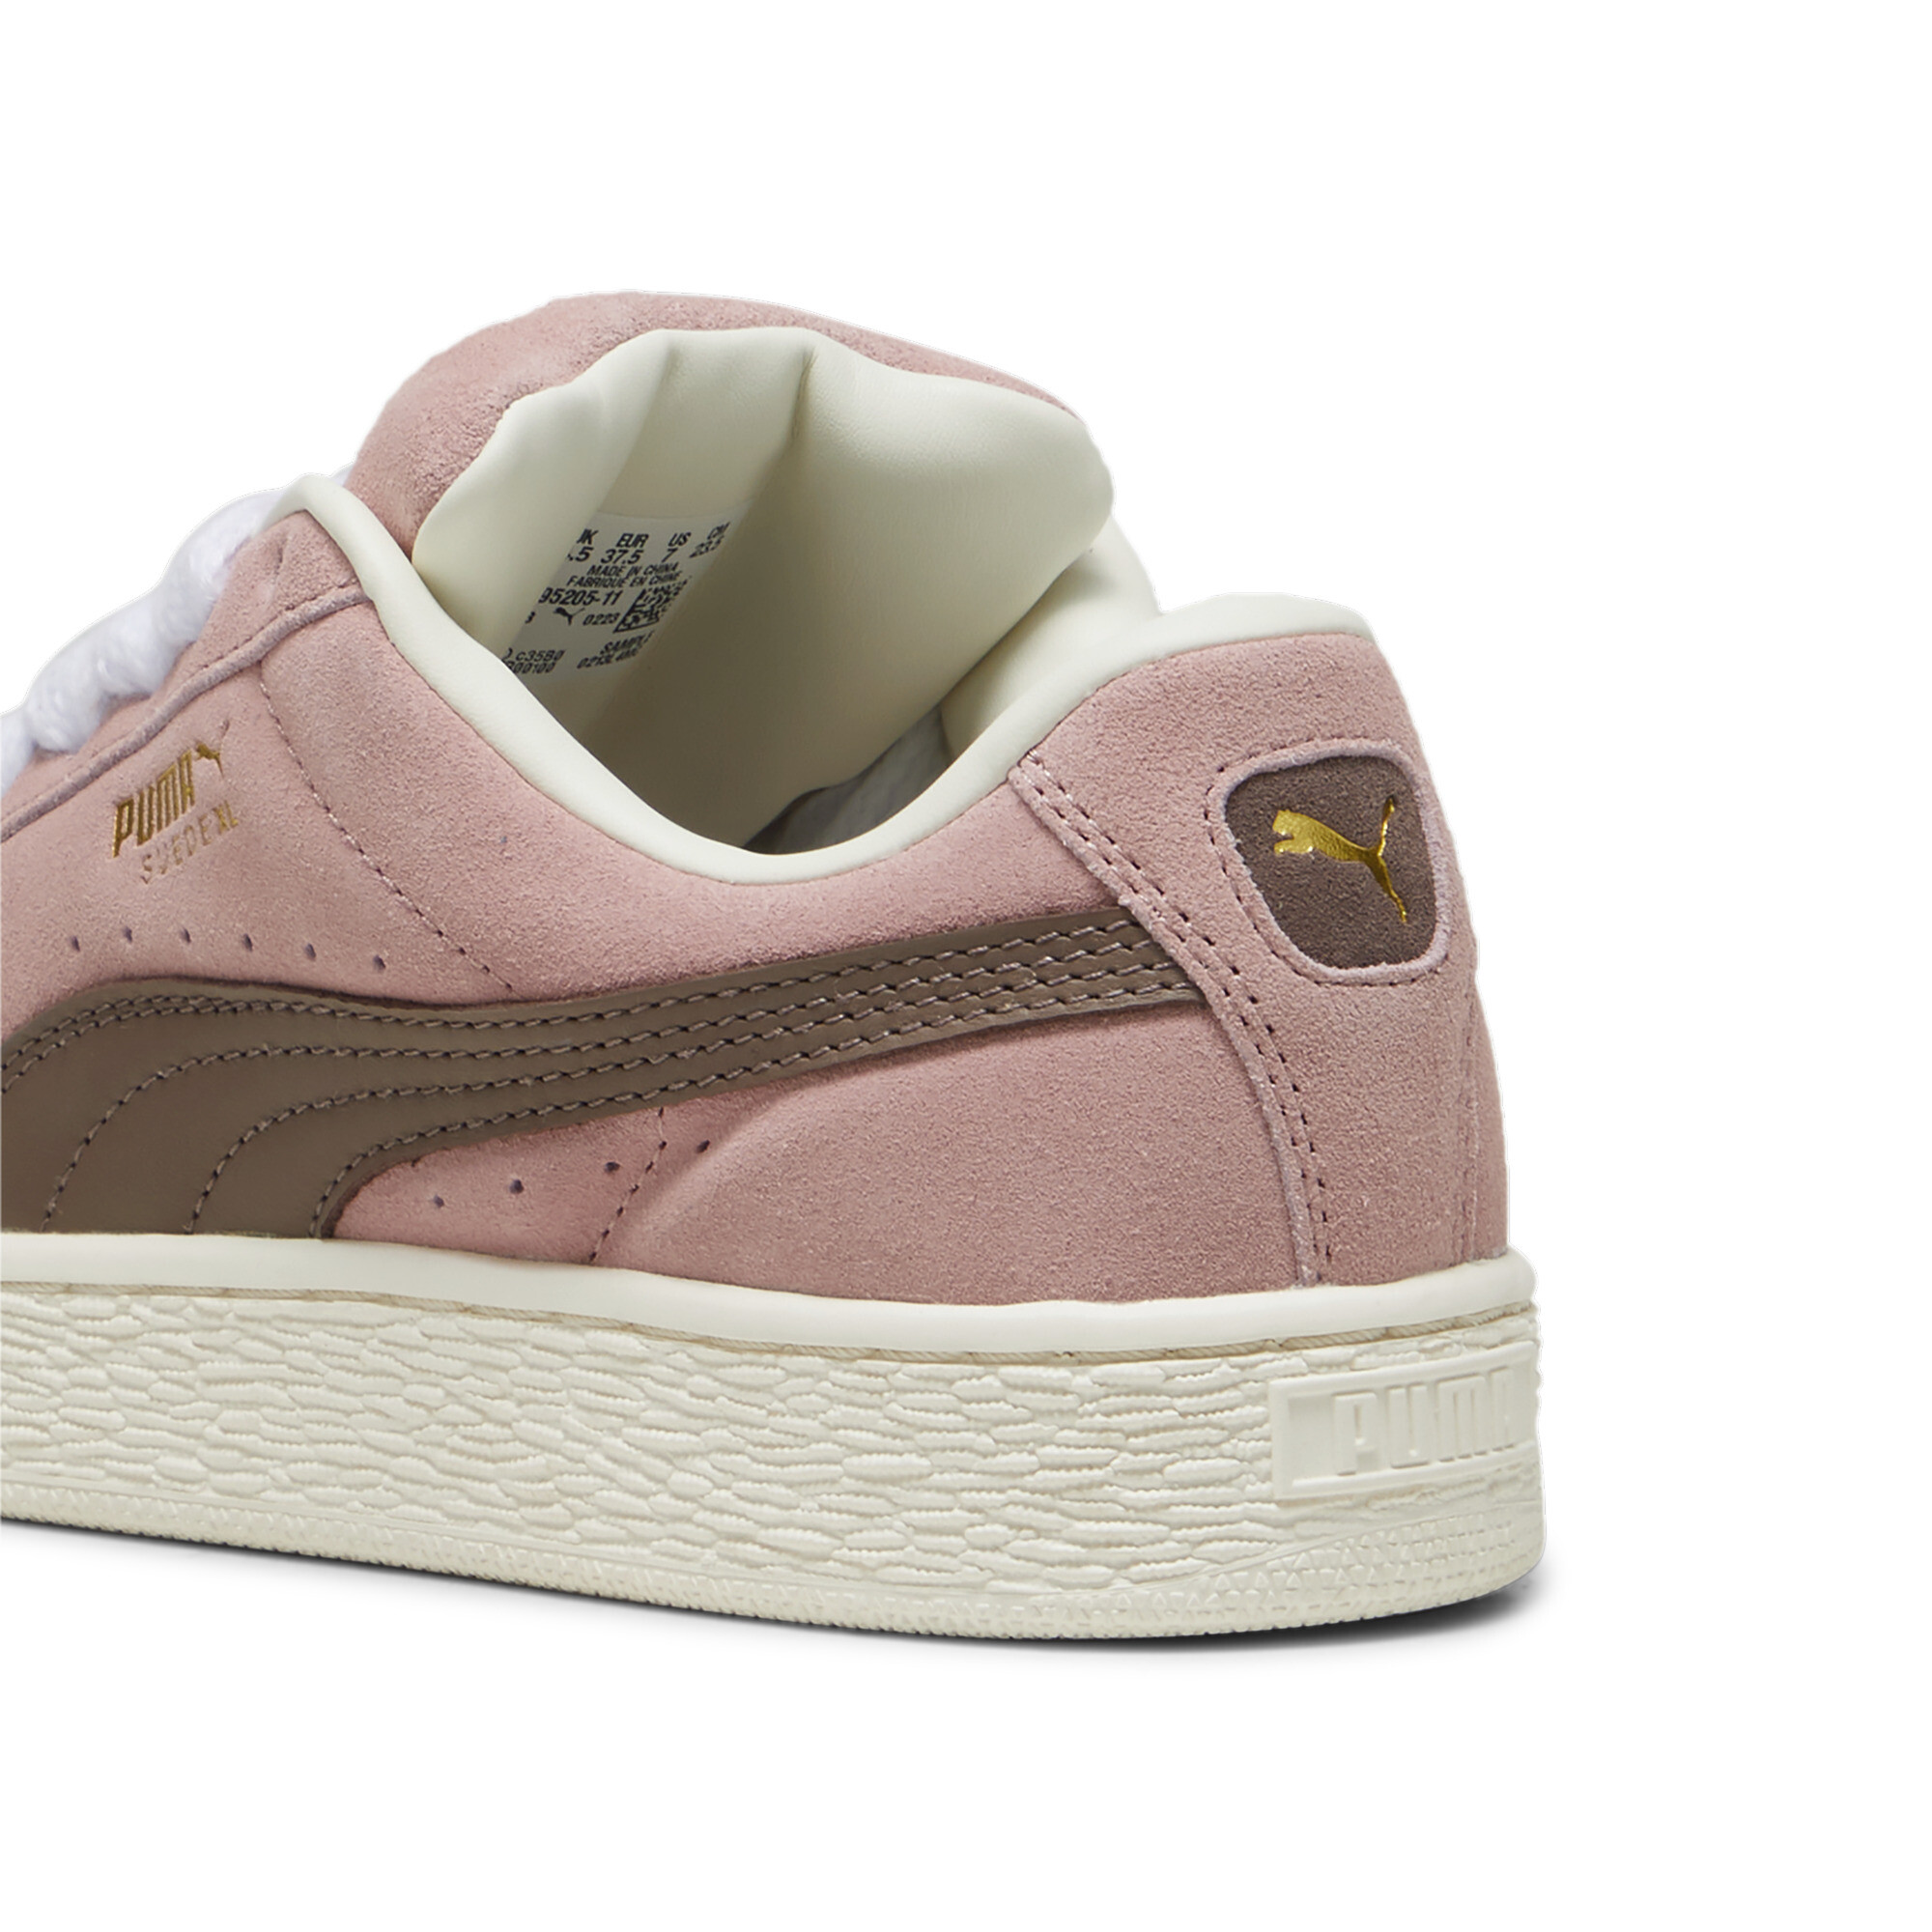 Puma Suede XL Sneakers Unisex, Pink, Size 39, Shoes